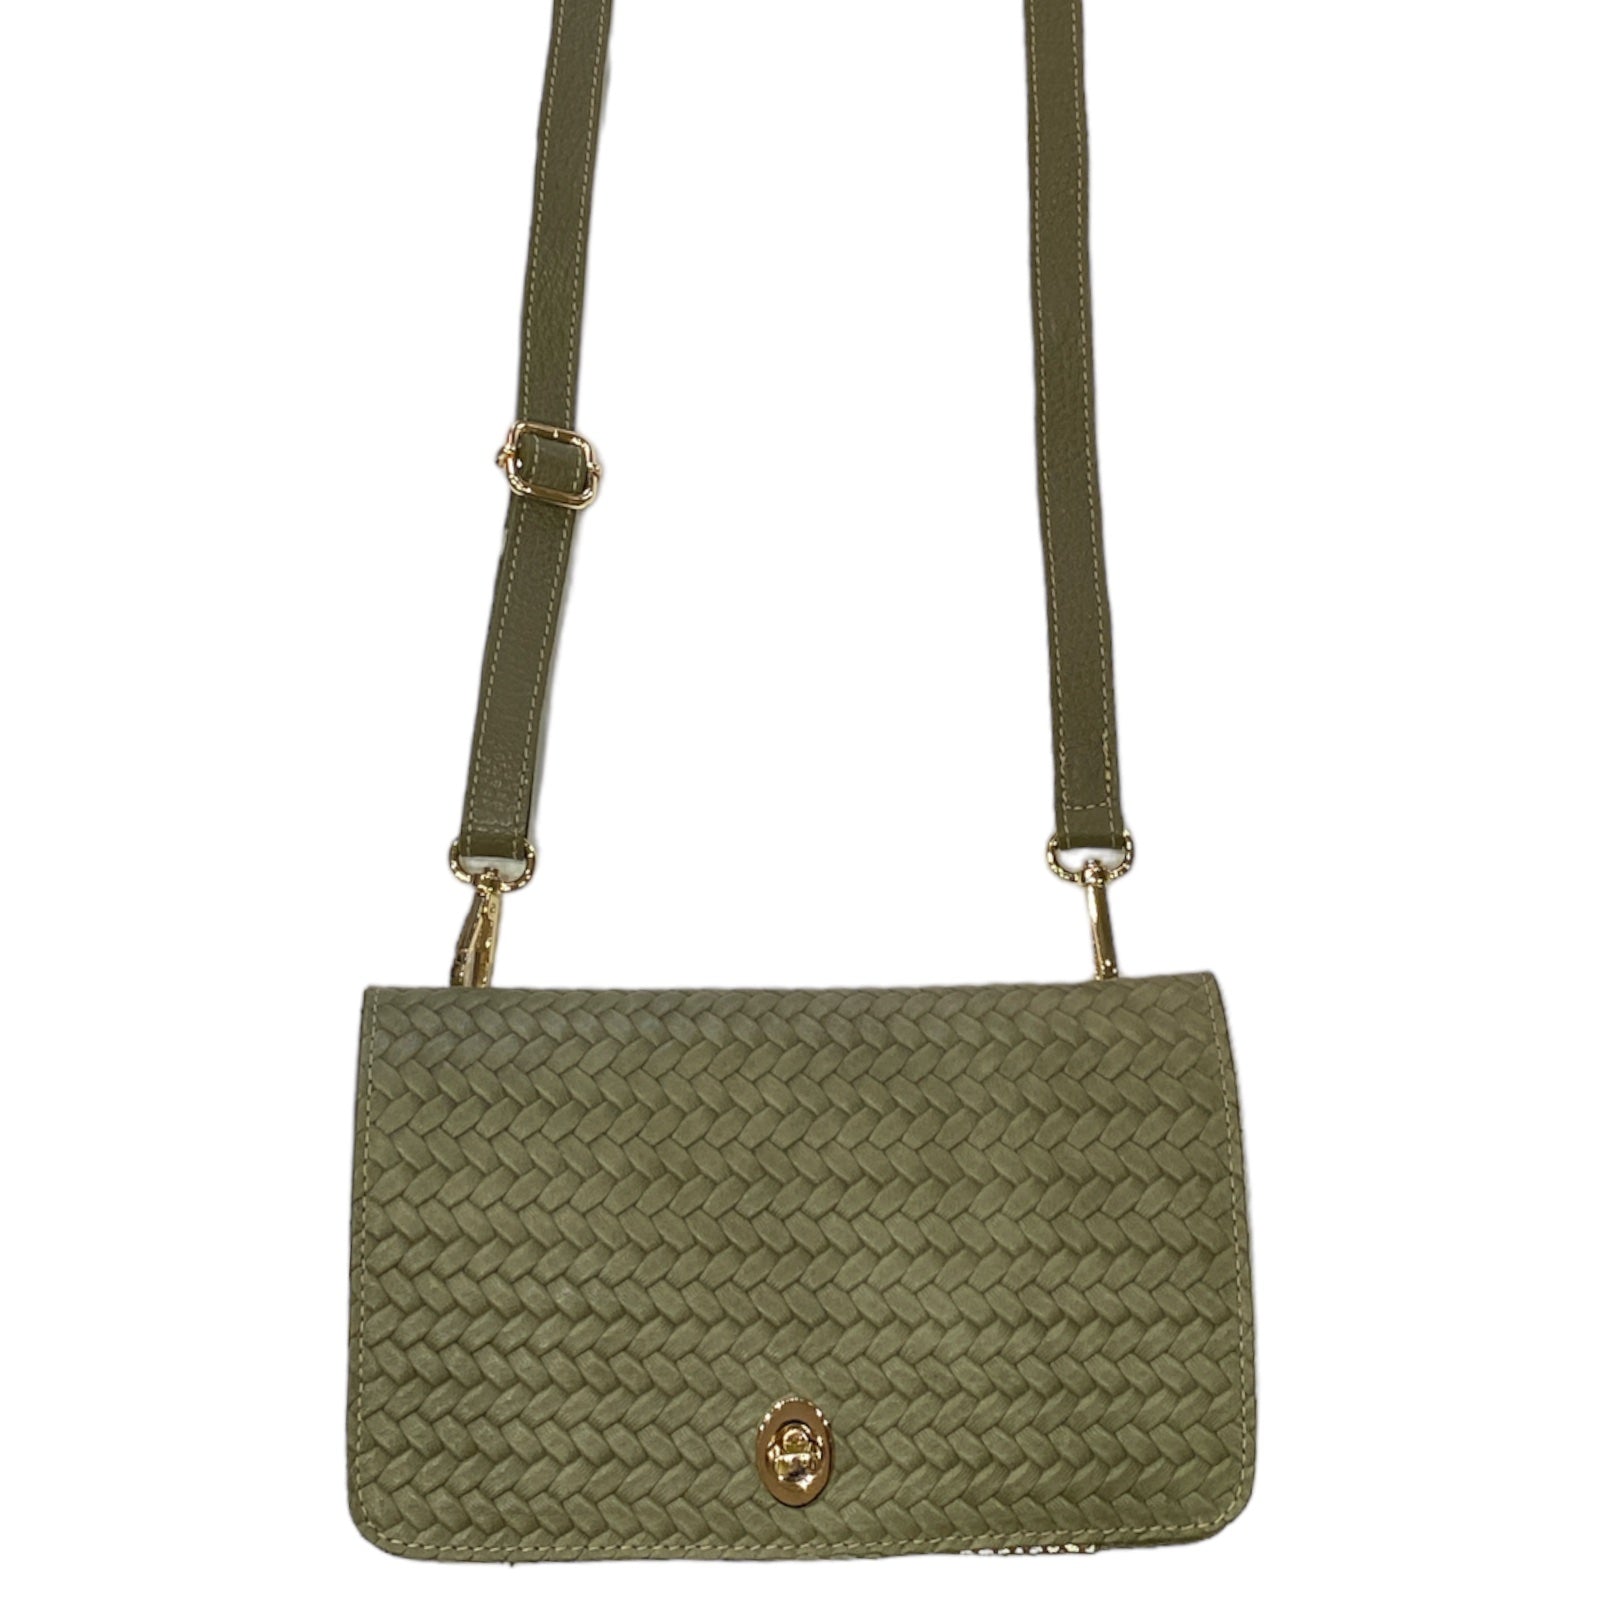 Olive green woven-print leather multi wallet bag